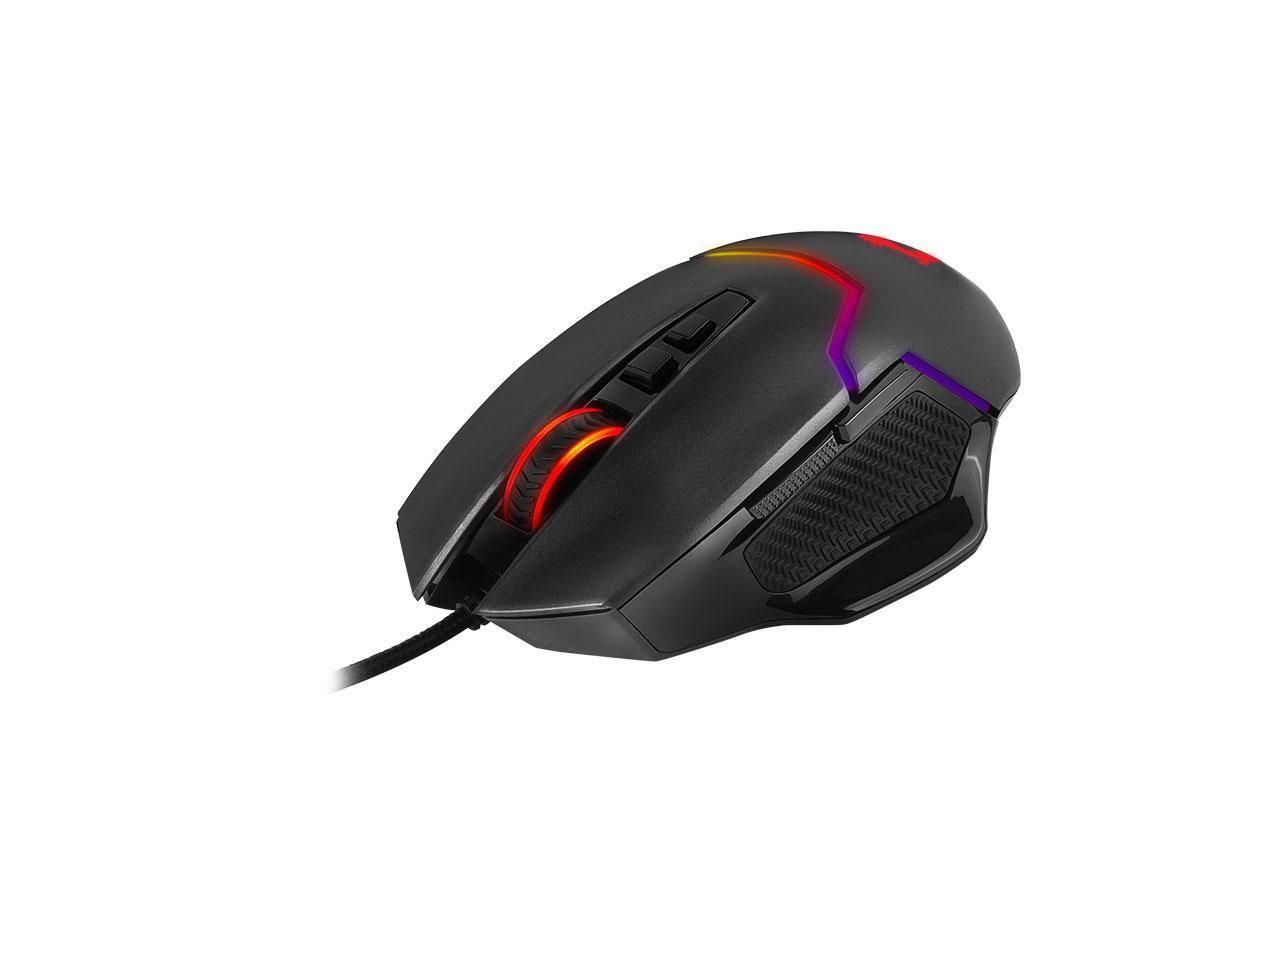 MSI GAMING MOUSE MSI Clutch GM20 Gaming Mouse, RGB Glare, Black